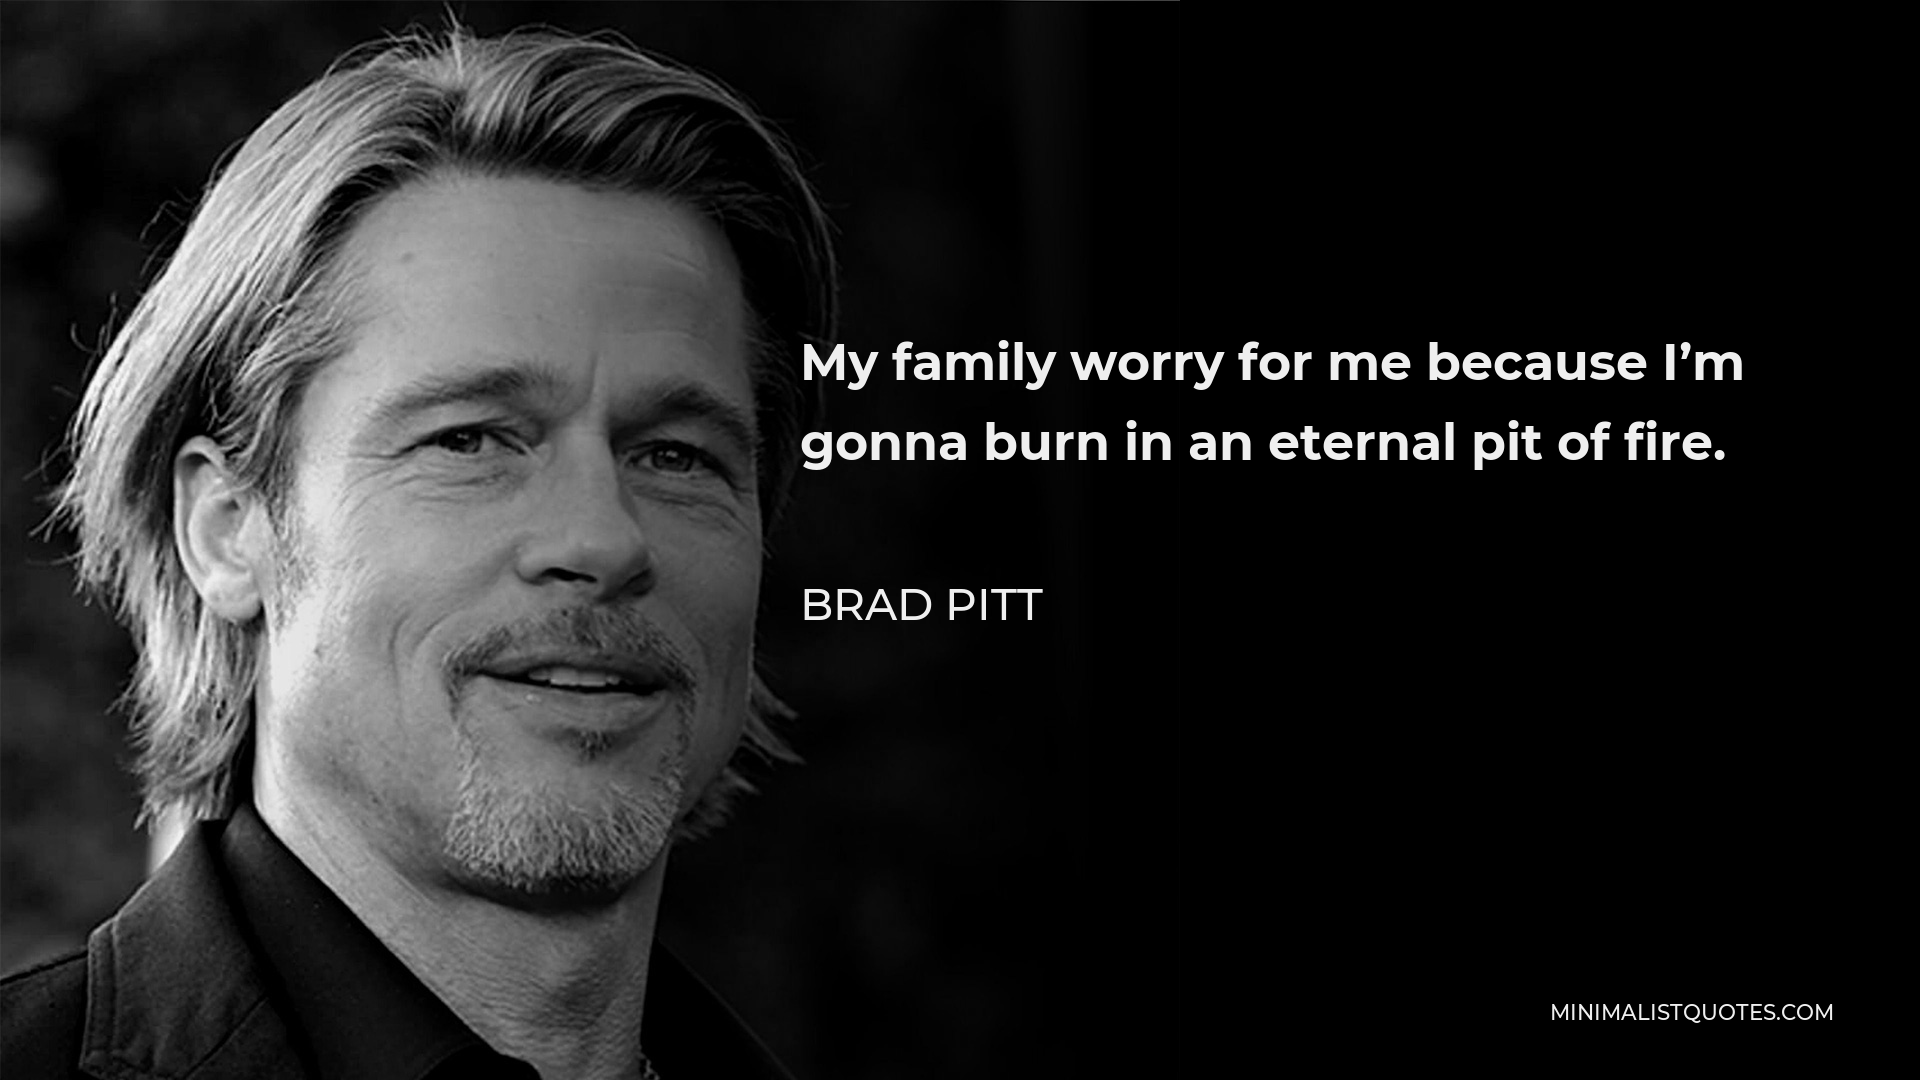 Brad Pitt Quote - My family worry for me because I’m gonna burn in an eternal pit of fire.